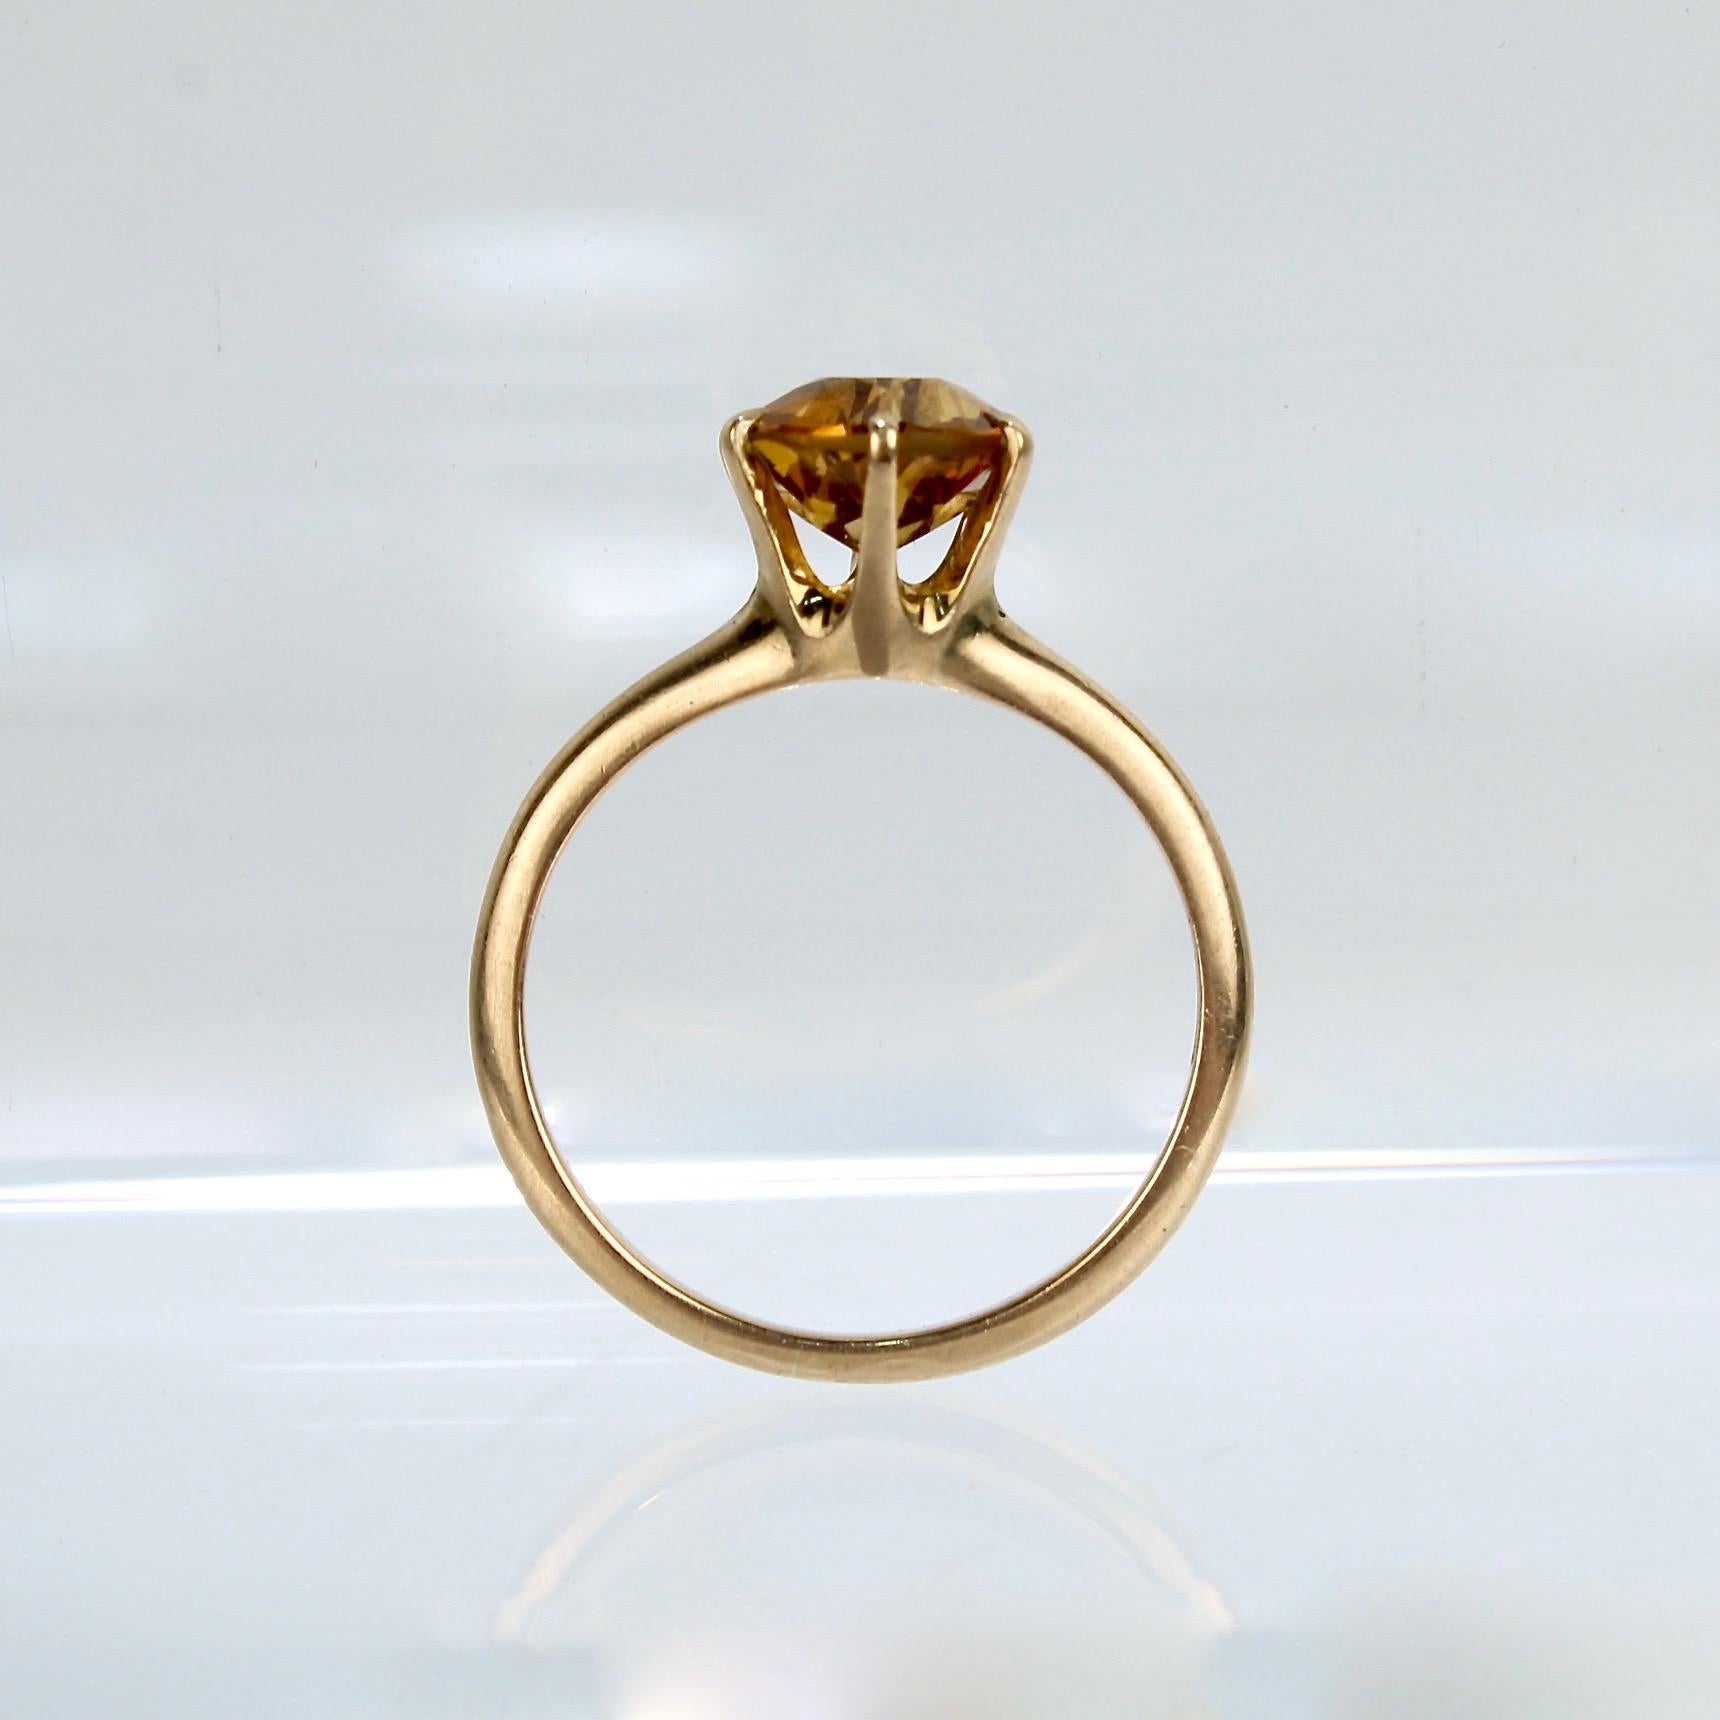 A fine 10K gold and citrine gemstone ring.

This simple band has a high prong set organe-toned, round-cut citrine solitaire gemstone.

Stamped TKB for the maker to the shank. Unmarked for gold fineness. Professionally tests at 10K.

A great vintage